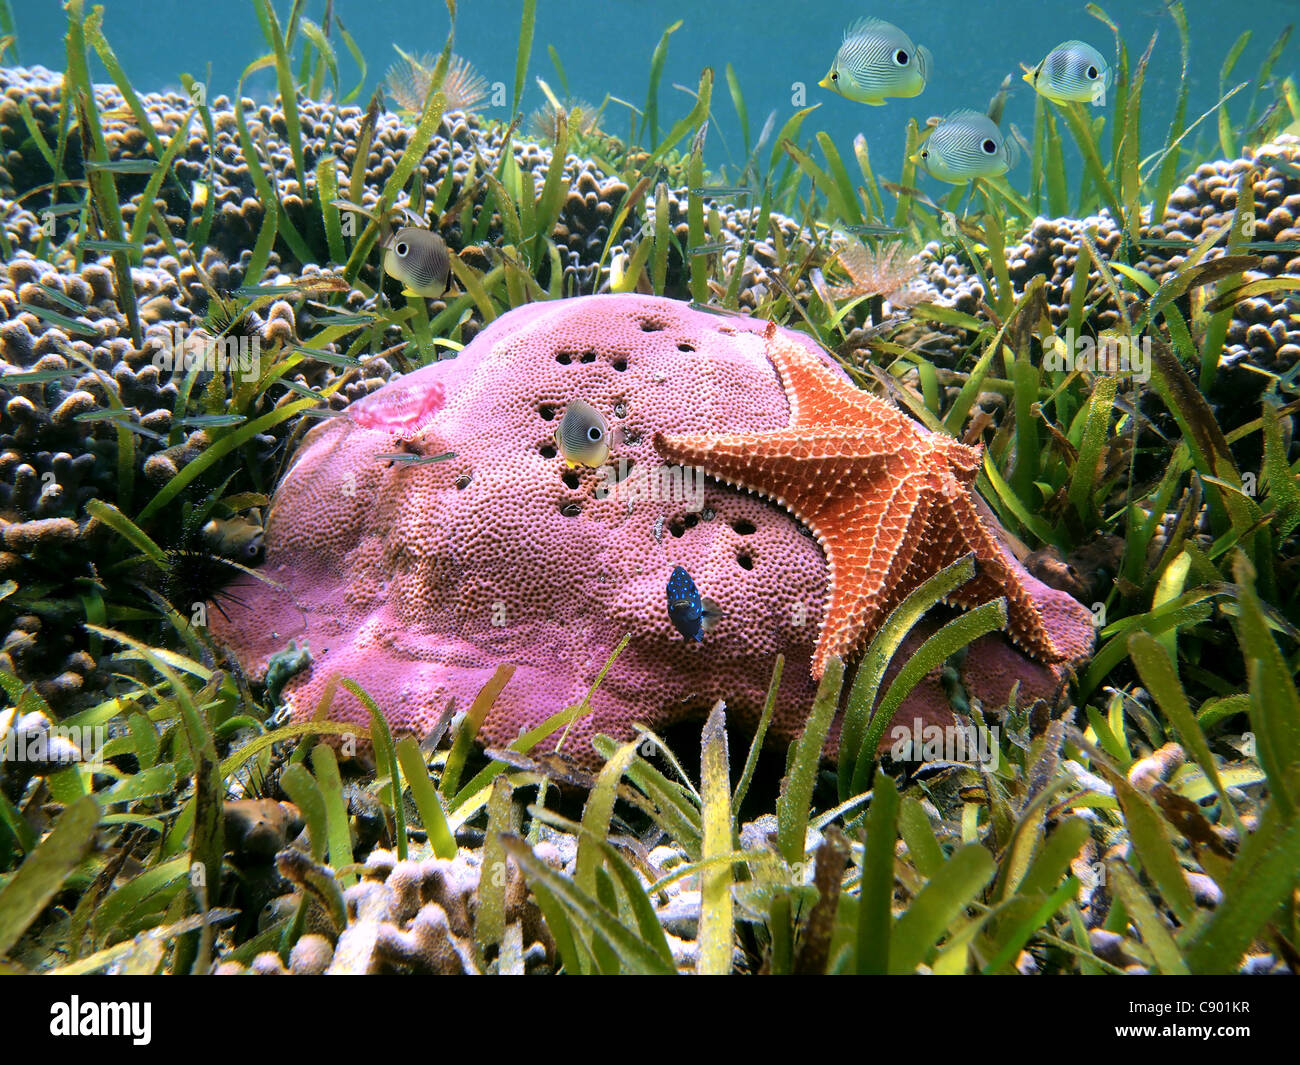 Starfish on hard coral with school of colorful tropical fish, Caribbean sea Stock Photo